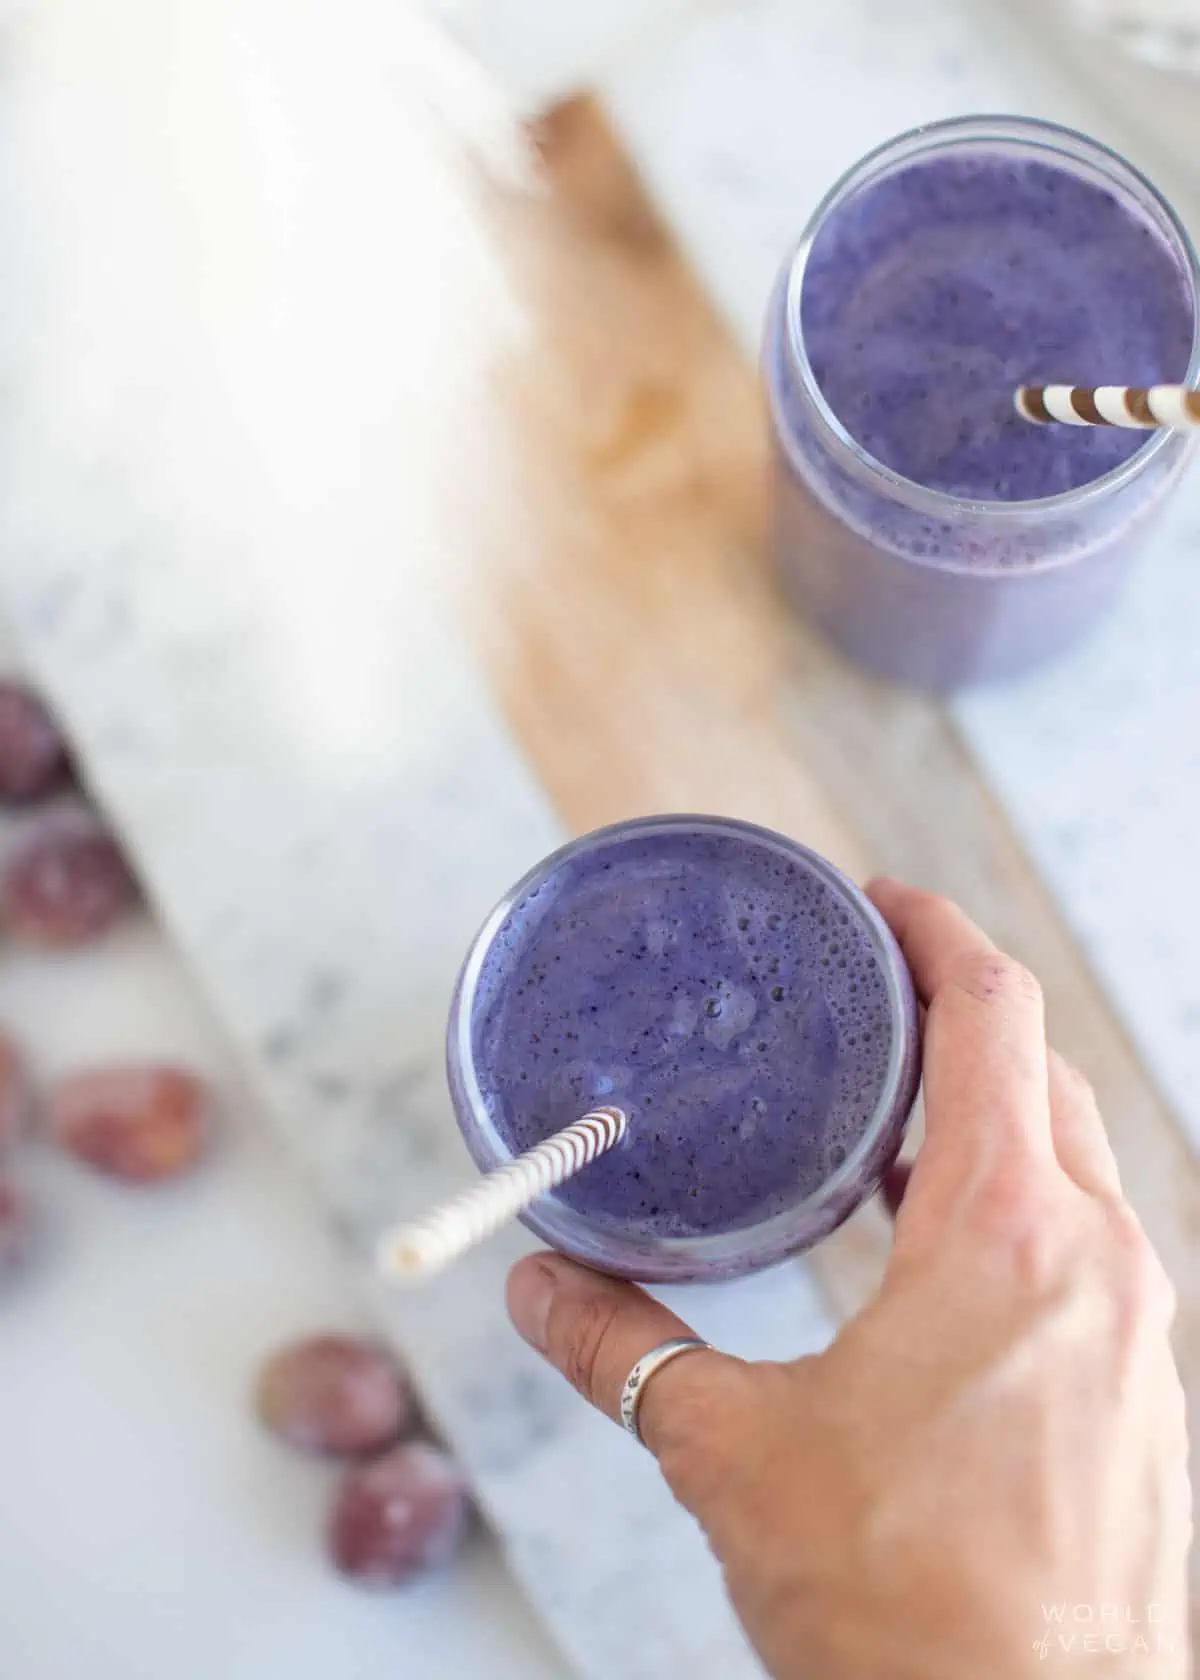 A hand reaching for a glass filled with the purple grape smoothie.